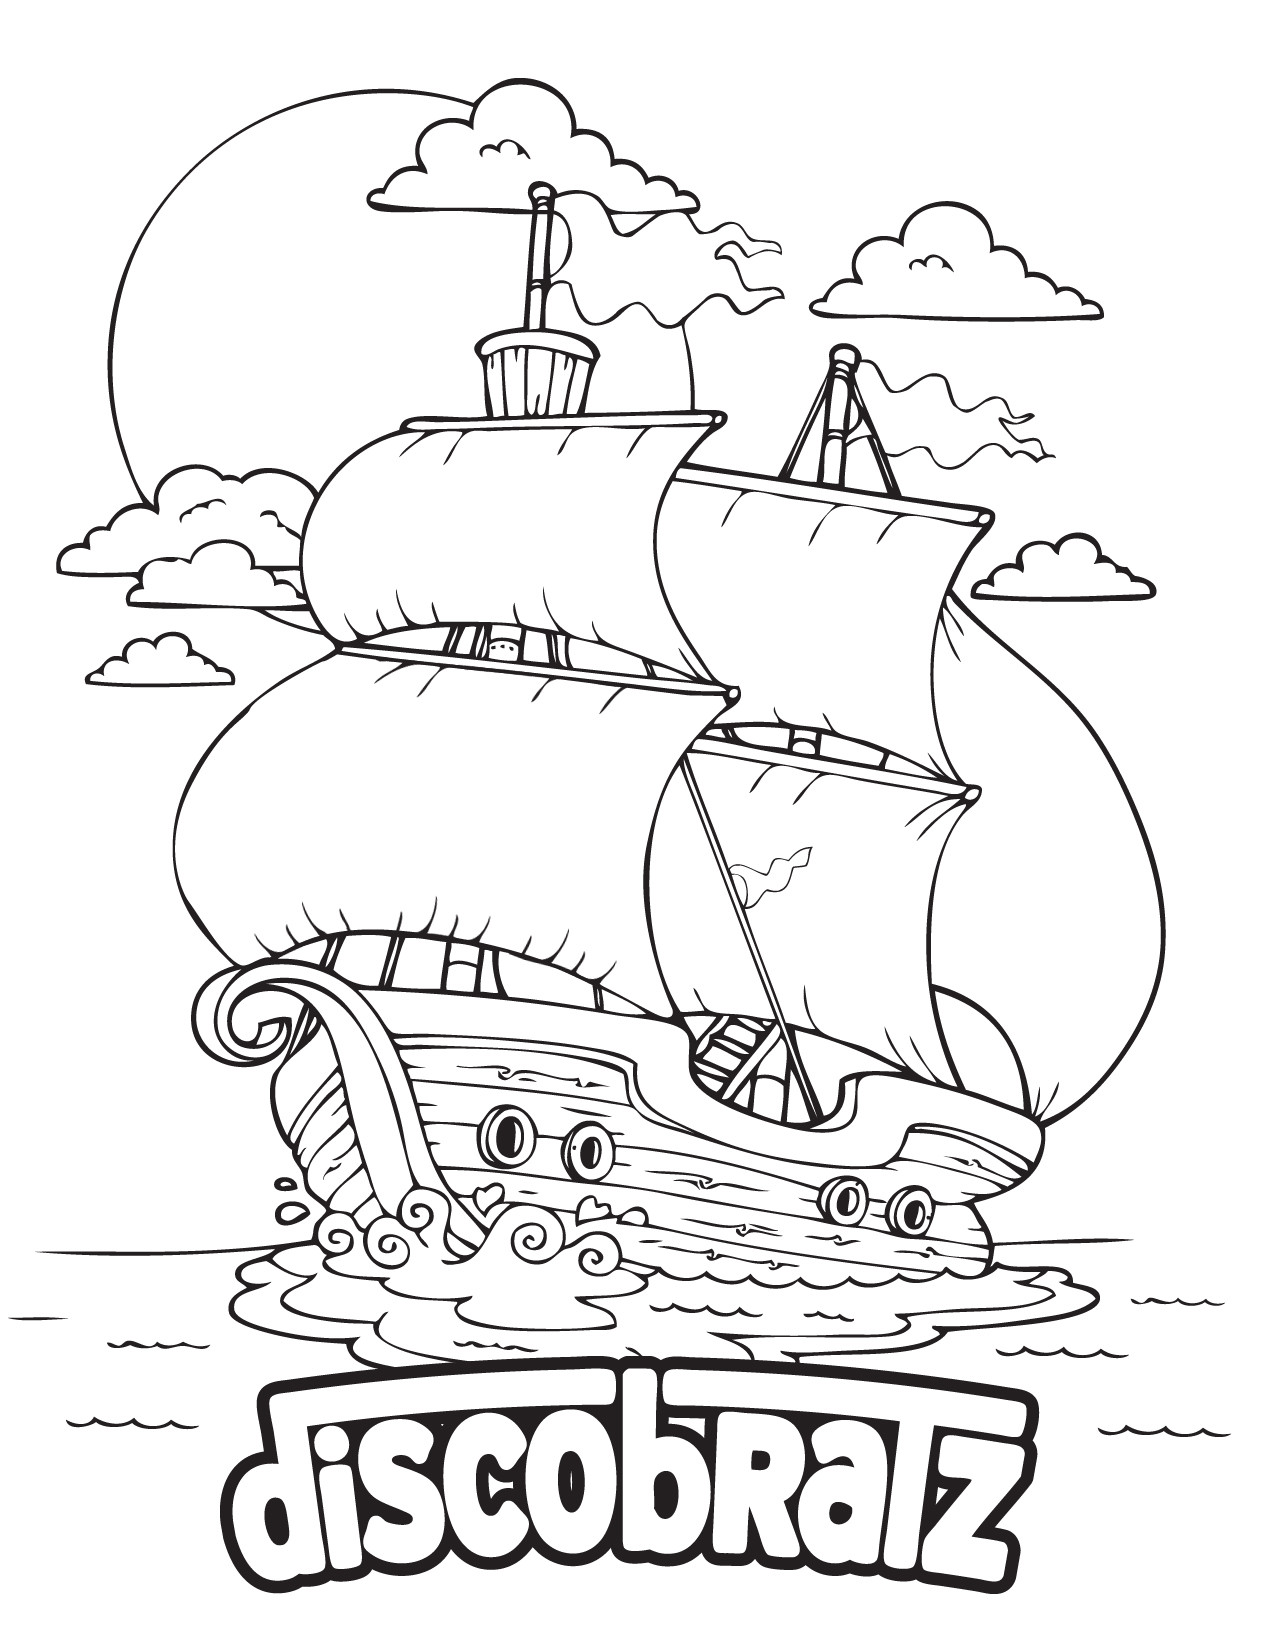 Mayflower Coloring Page at GetColorings.com | Free printable colorings